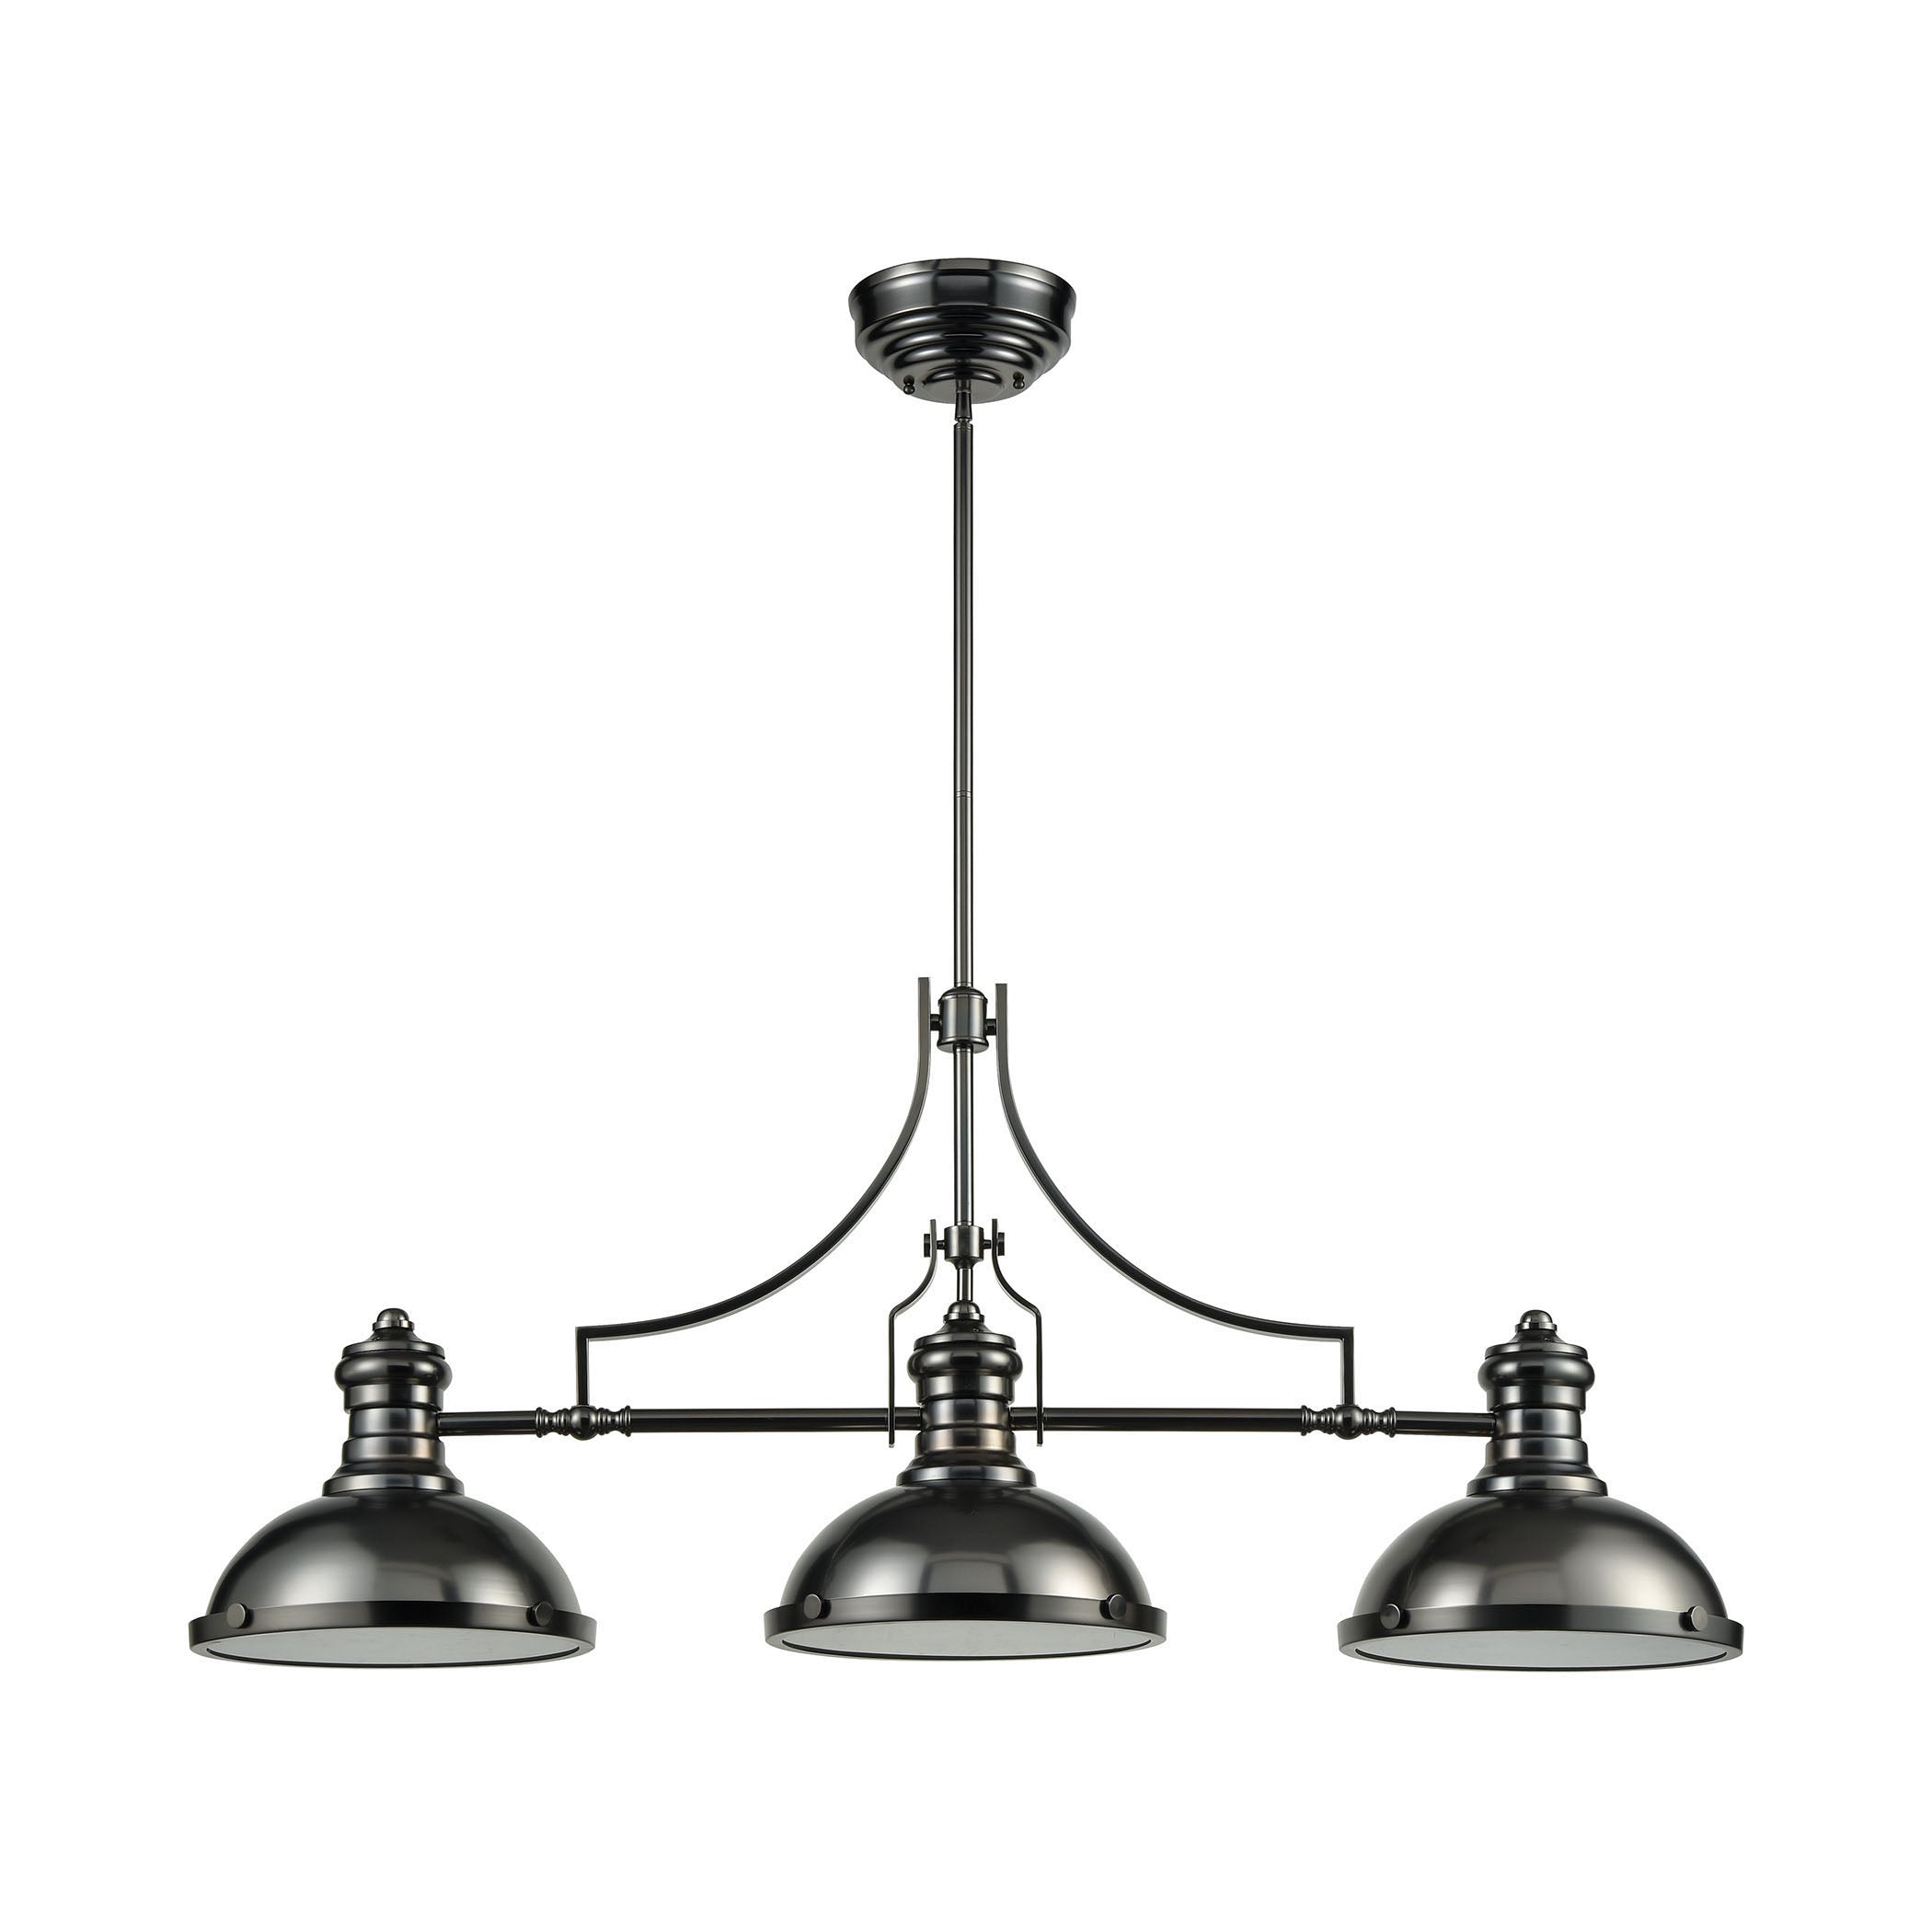 ELK Lighting 66605-3 Chadwick 3-Light Island Light in Black Nickel with Metal Shade and Frosted Glass Diffuser